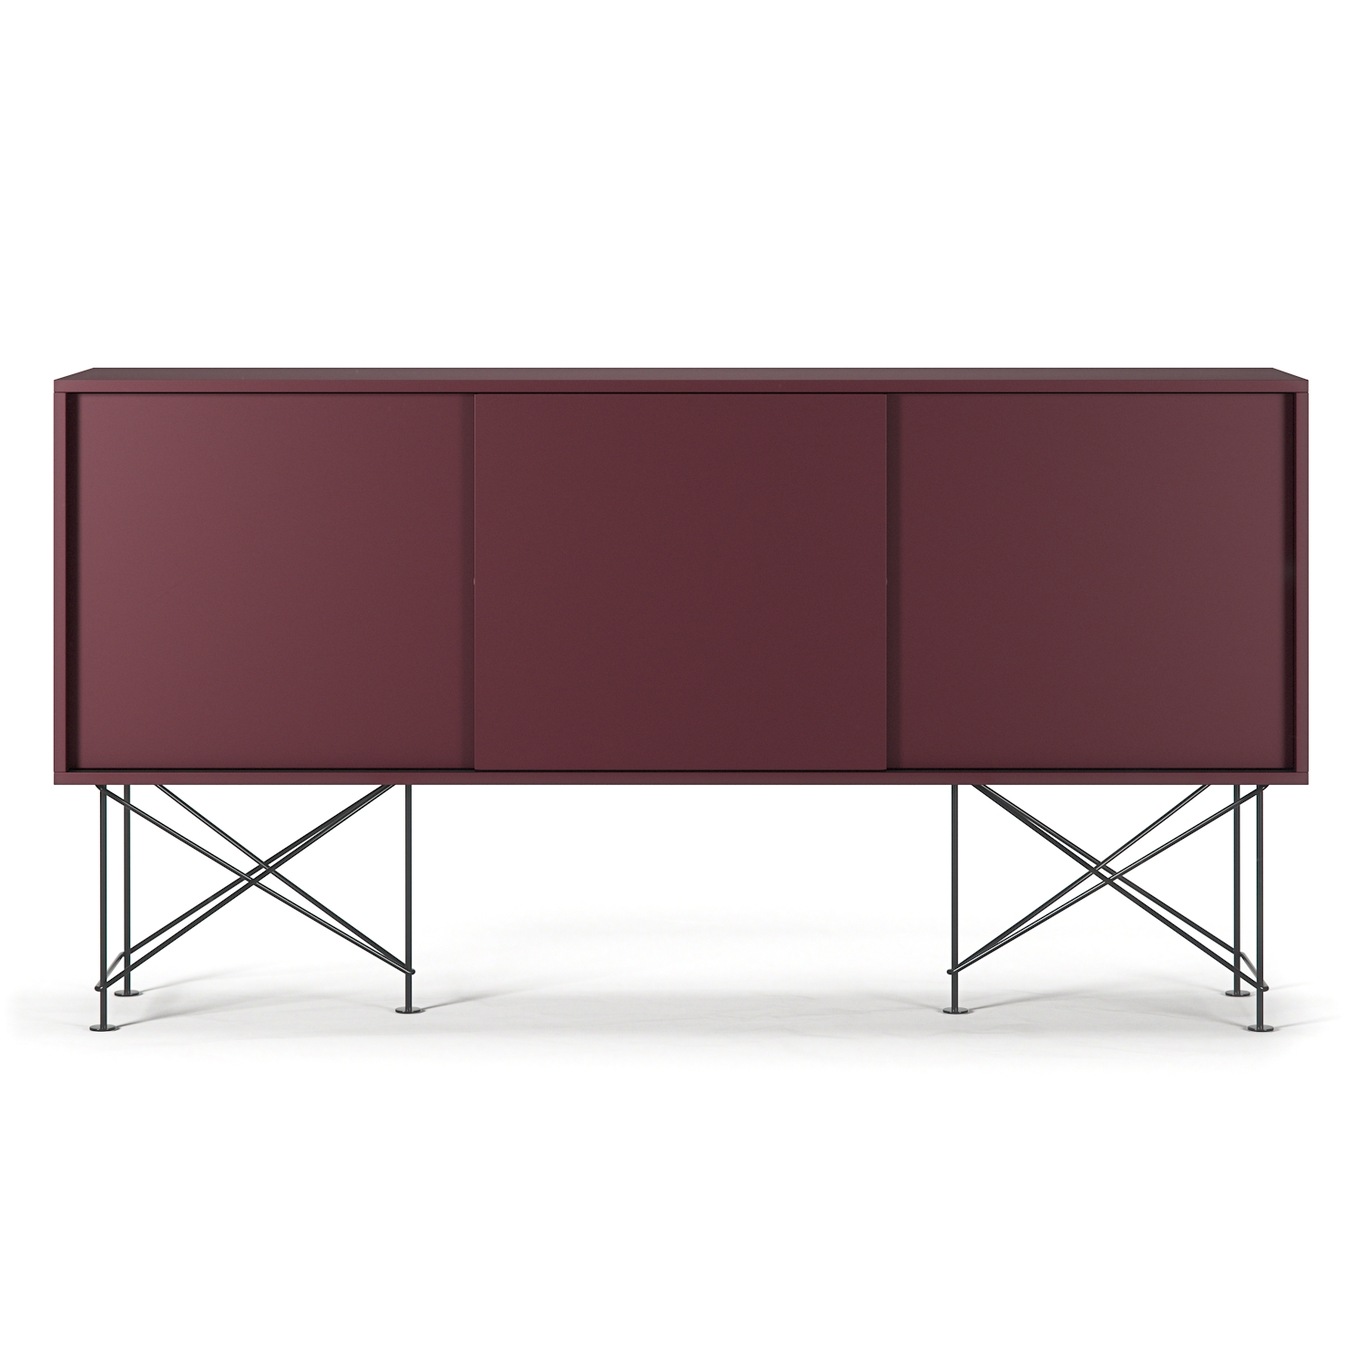 Vogue Sideboard With Stand 180 cm, Wine Red / Black